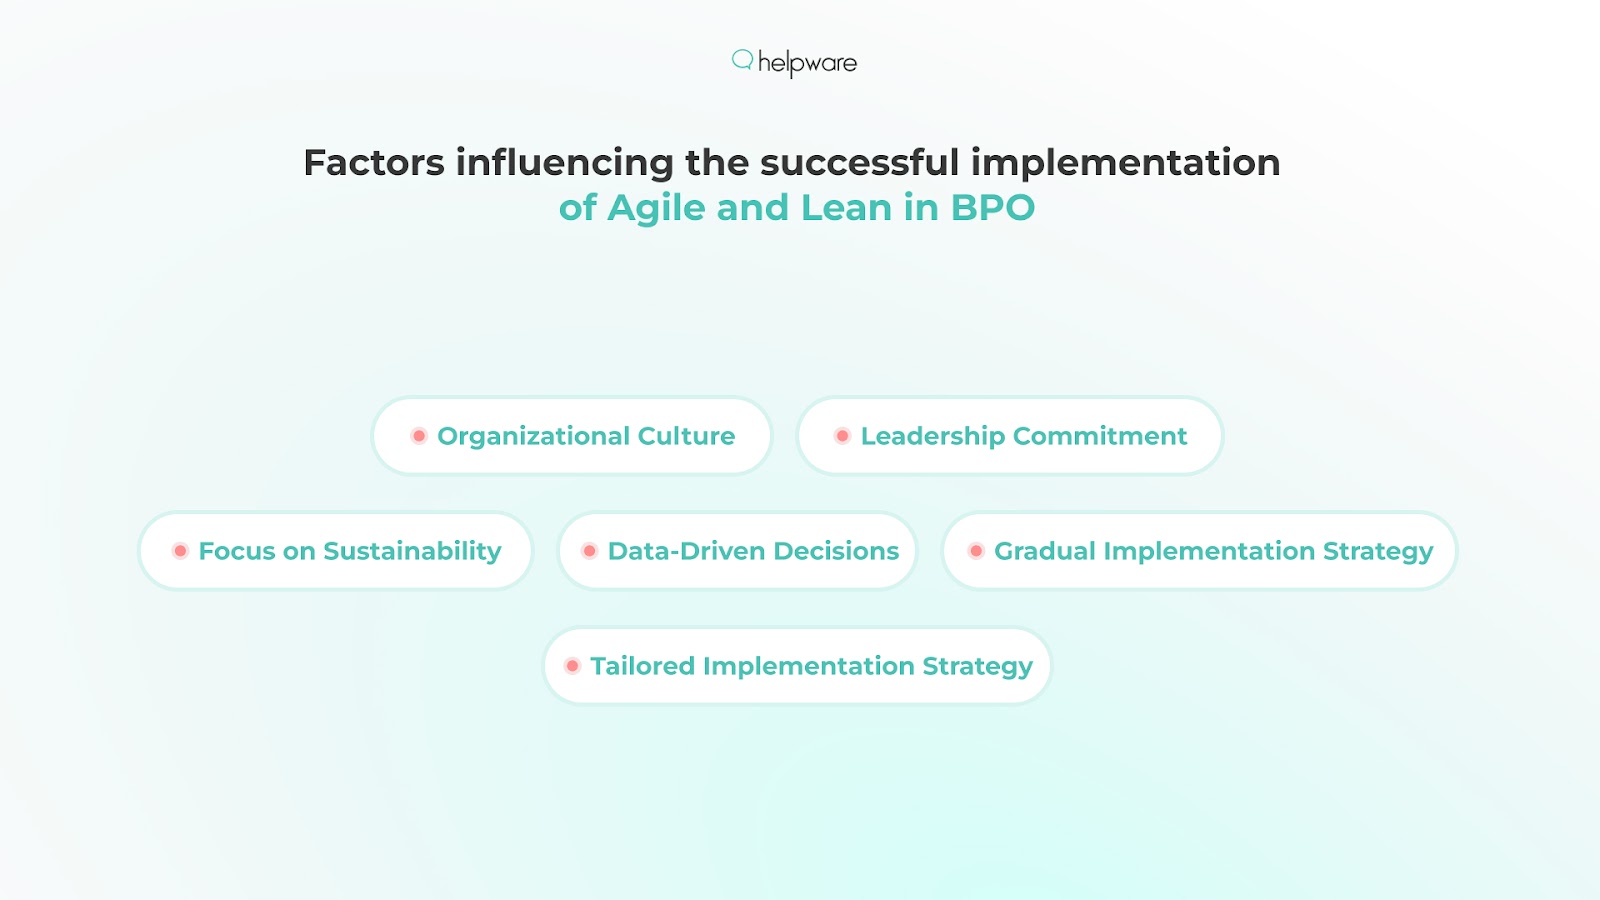 Factors influencing the successful implementation of Agile and Lean in BPO 